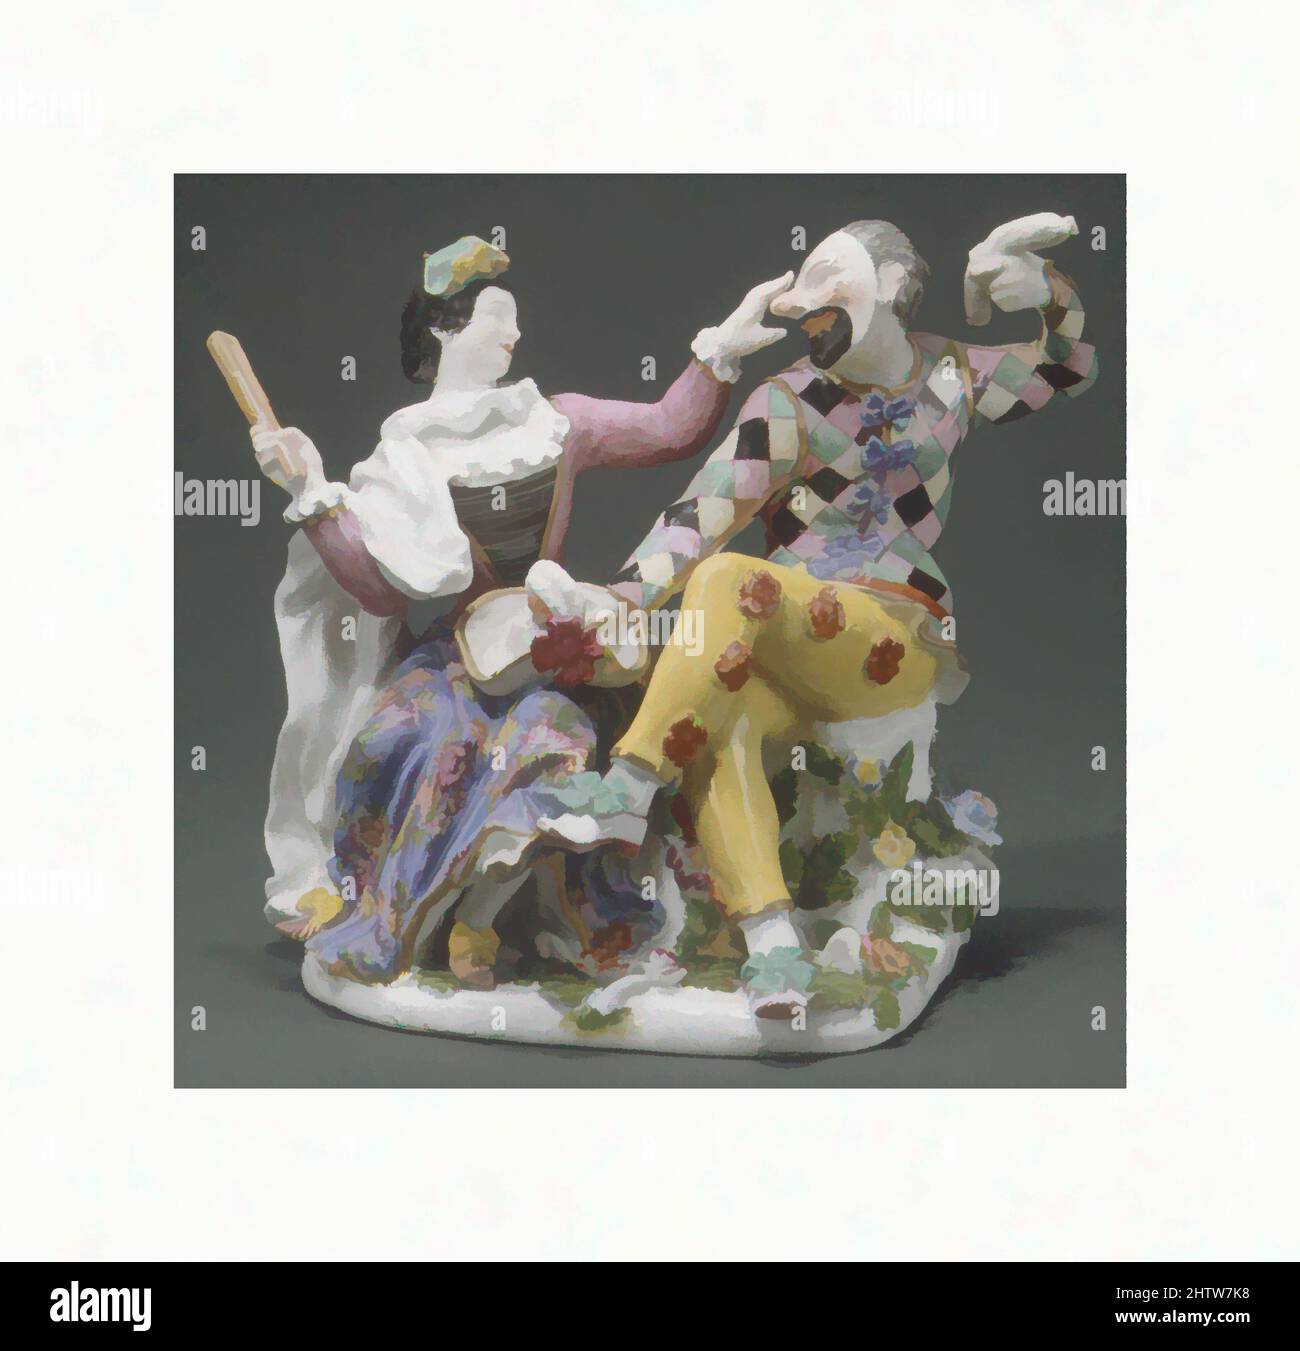 Art inspired by Hanswurst and Columbine, modeled 1743, German, Meissen, Hard-paste porcelain, Height: 6 in. (15.2 cm), Ceramics-Porcelain, Classic works modernized by Artotop with a splash of modernity. Shapes, color and value, eye-catching visual impact on art. Emotions through freedom of artworks in a contemporary way. A timeless message pursuing a wildly creative new direction. Artists turning to the digital medium and creating the Artotop NFT Stock Photo